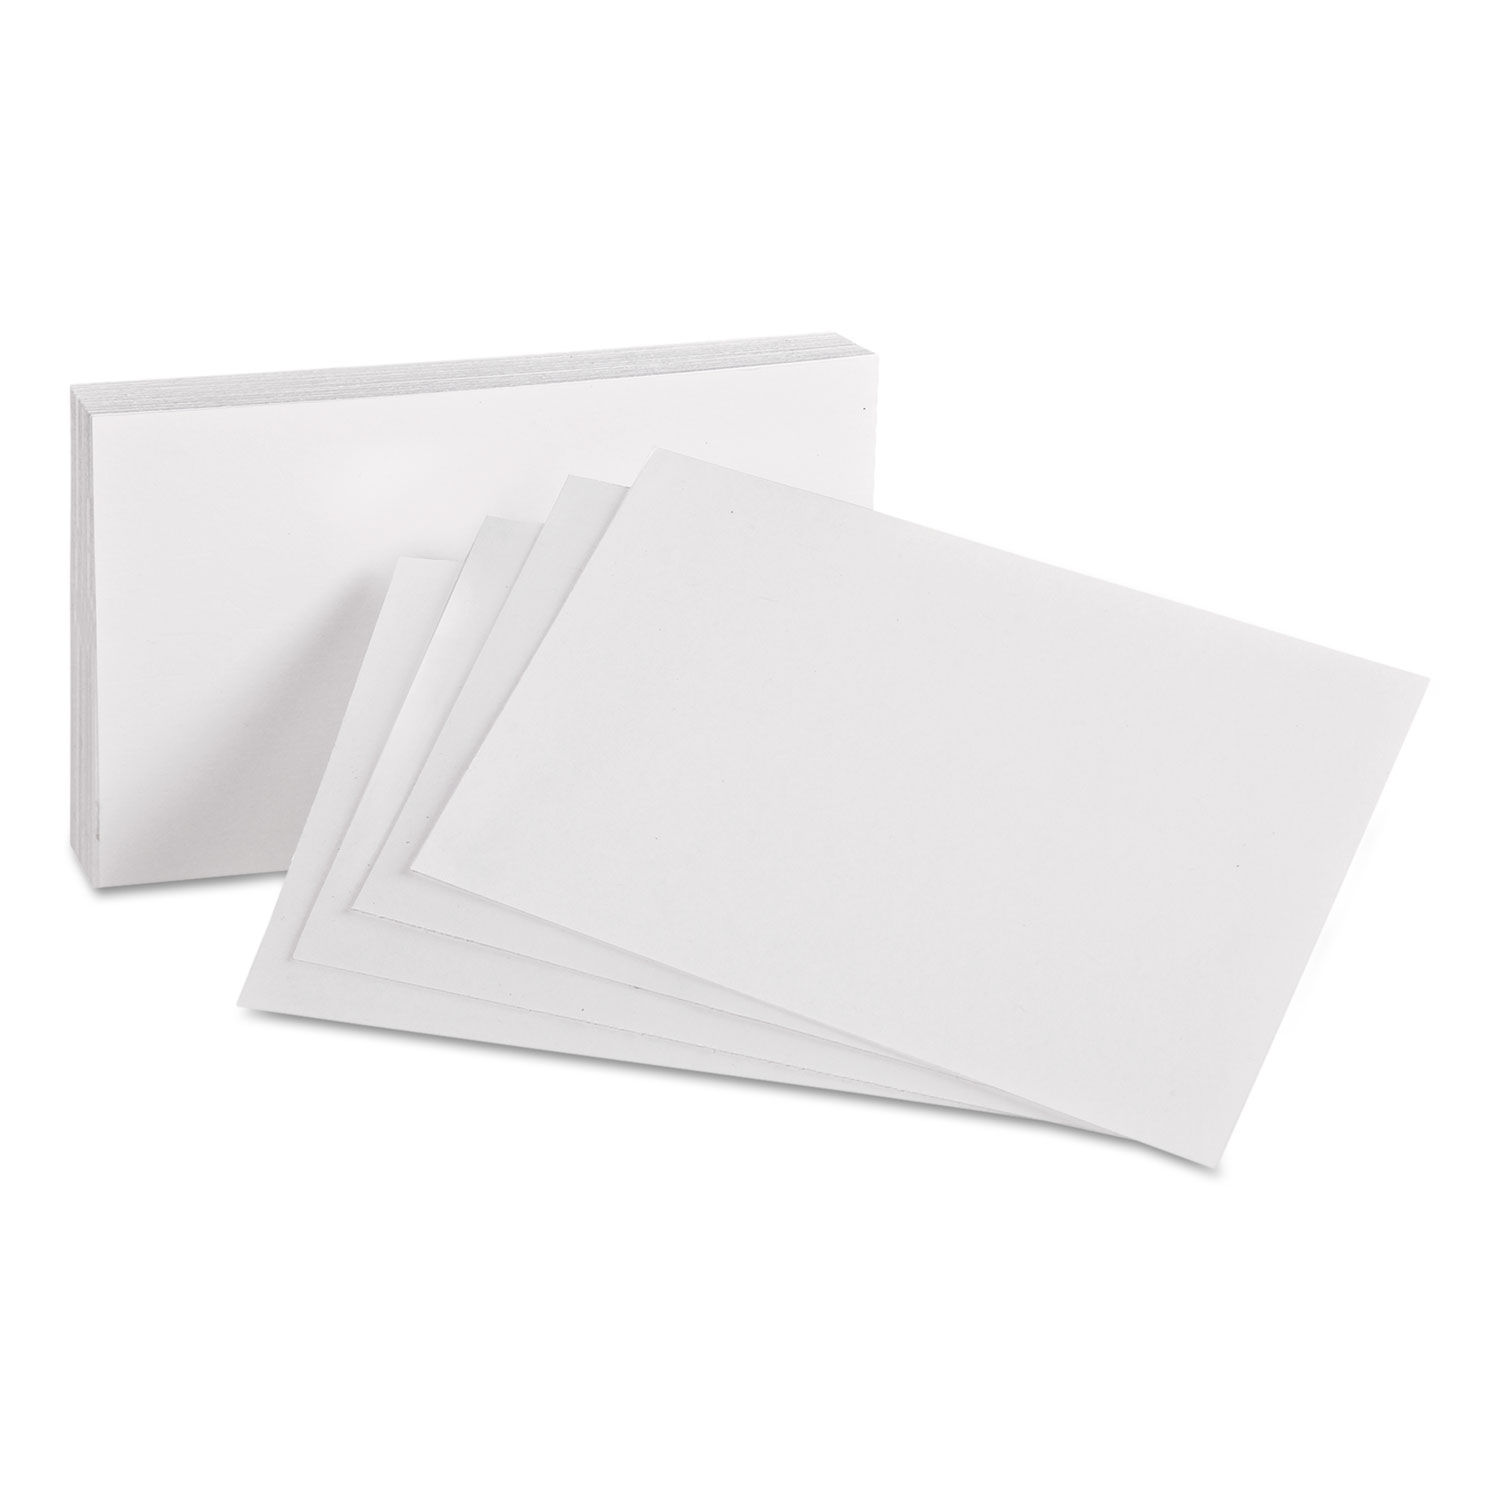 Unruled Index Cards 4 x 6, White, 100/Pack